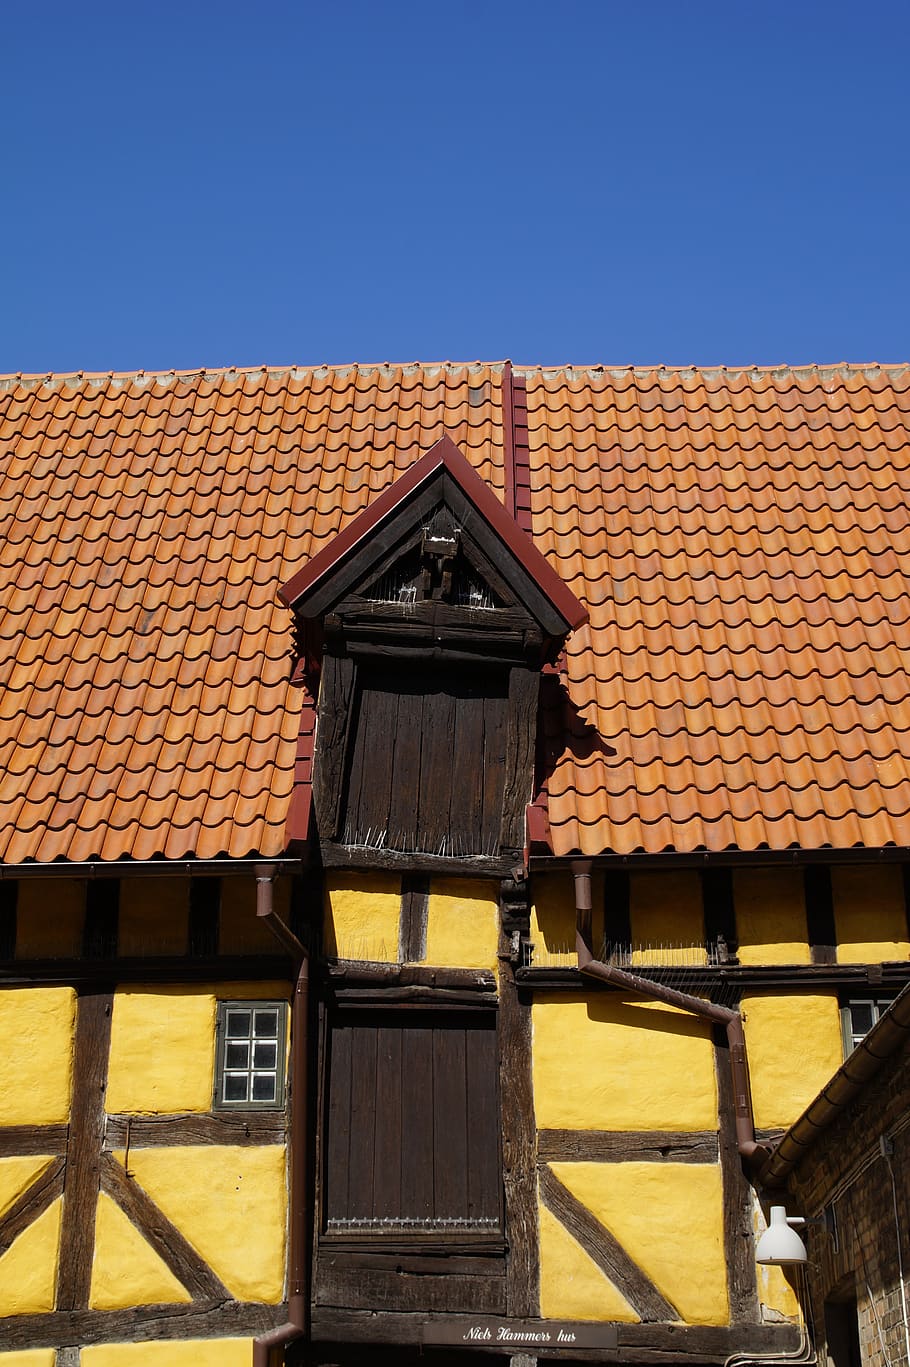 truss, fachwerkhaus, old, historically, wall, historic center, architecture, hauswand, askew, gable